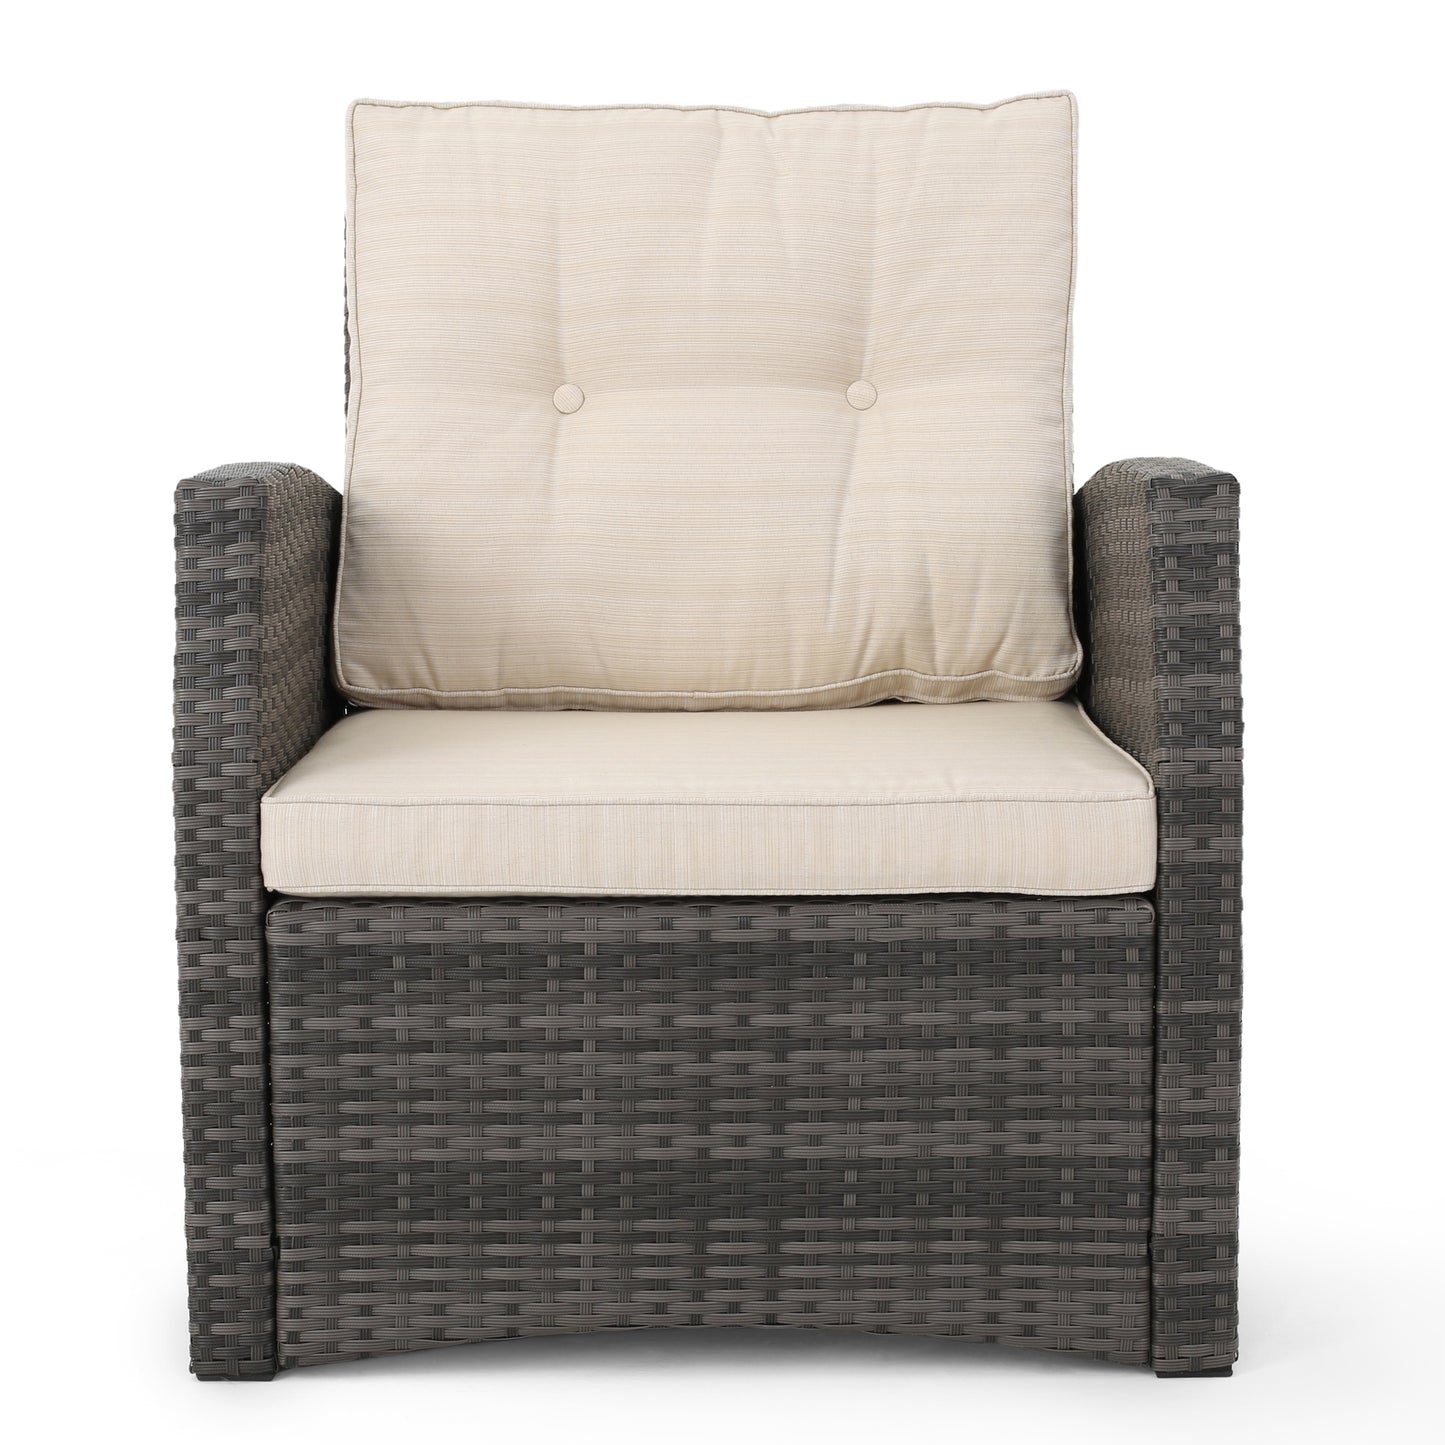 Jake Outdoor 7 Seater Wicker Chat Set with Light Weight Concrete Fire Pit, Gray and Dark Gray